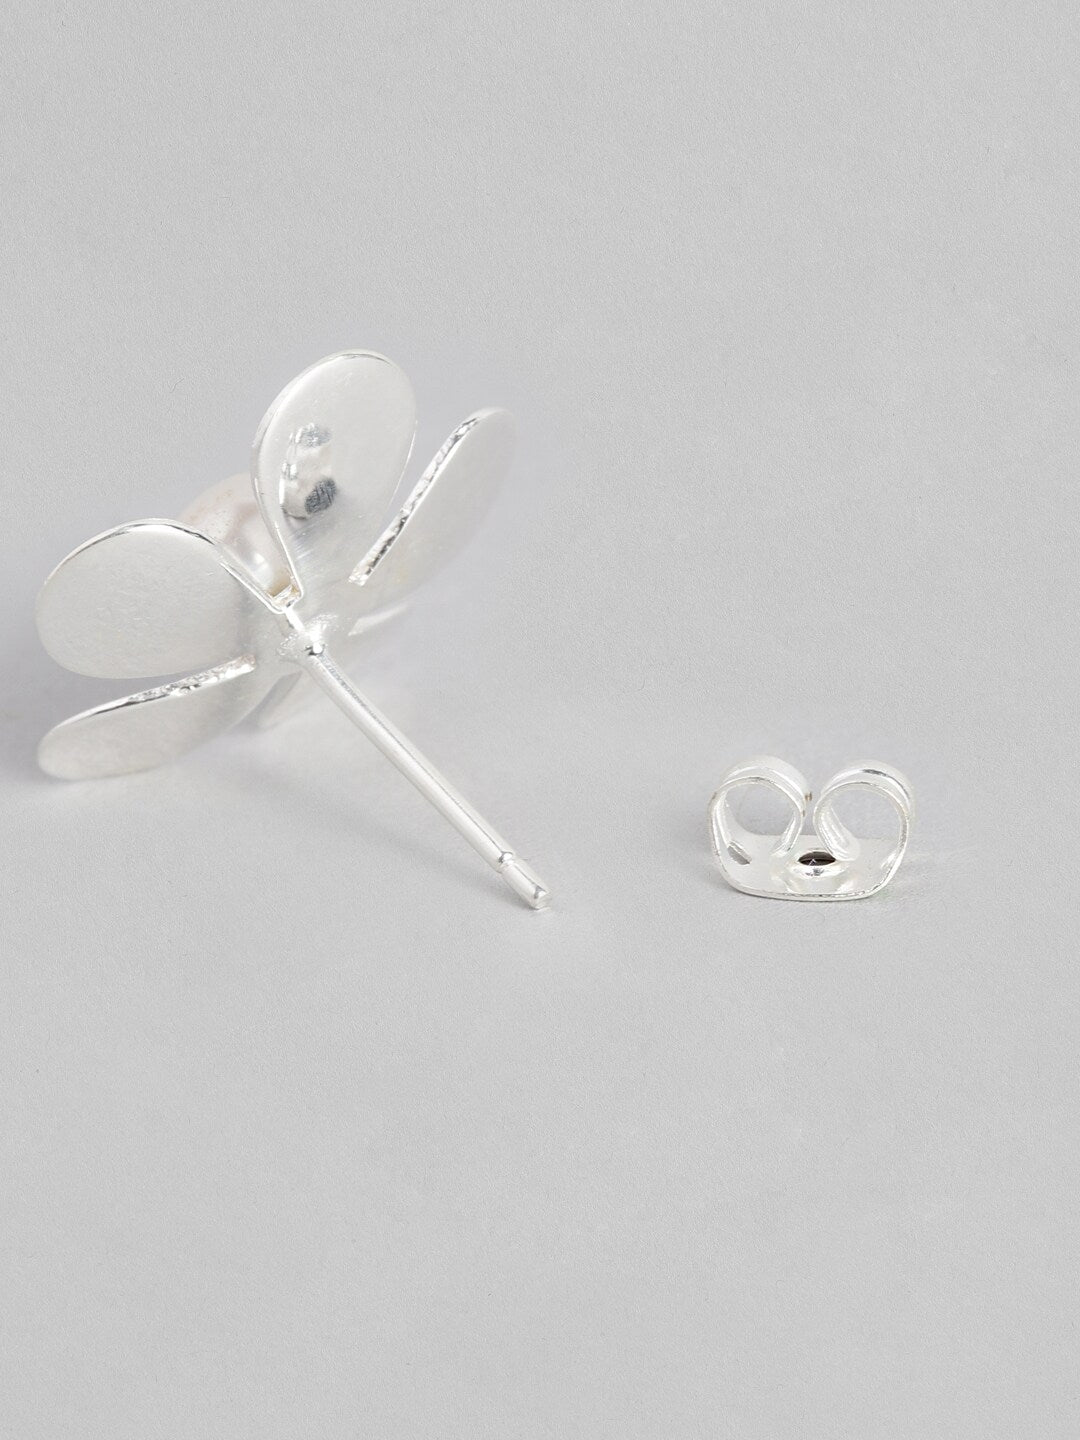 EL REGALO Silver-Toned & White Small Flower Pearl Studs Earrings - for Women and Girls
Style ID: 16287438